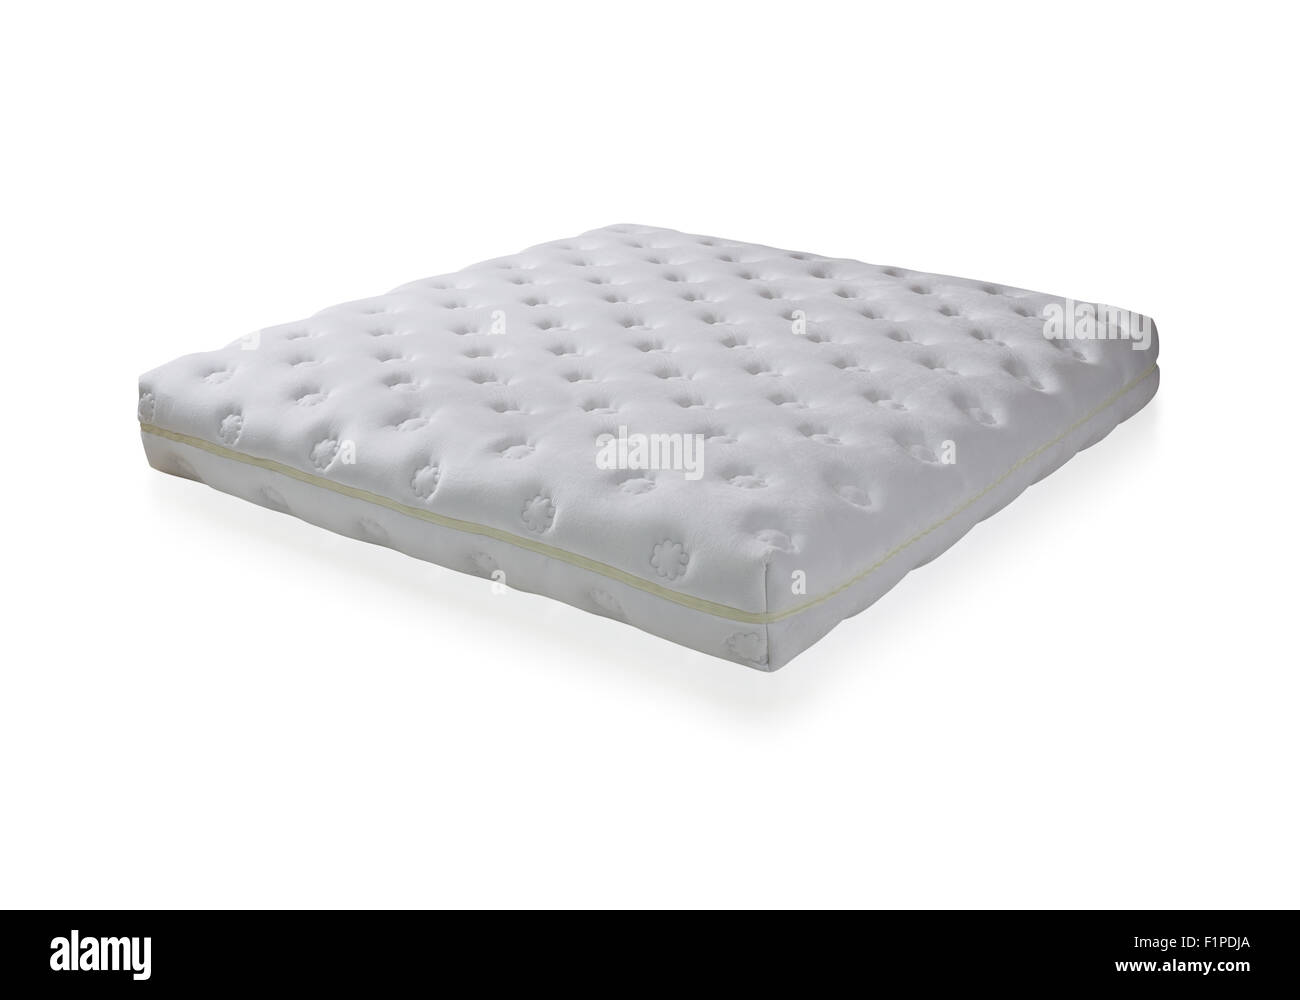 Mattress to supported back, the image isolated on white background Stock Photo